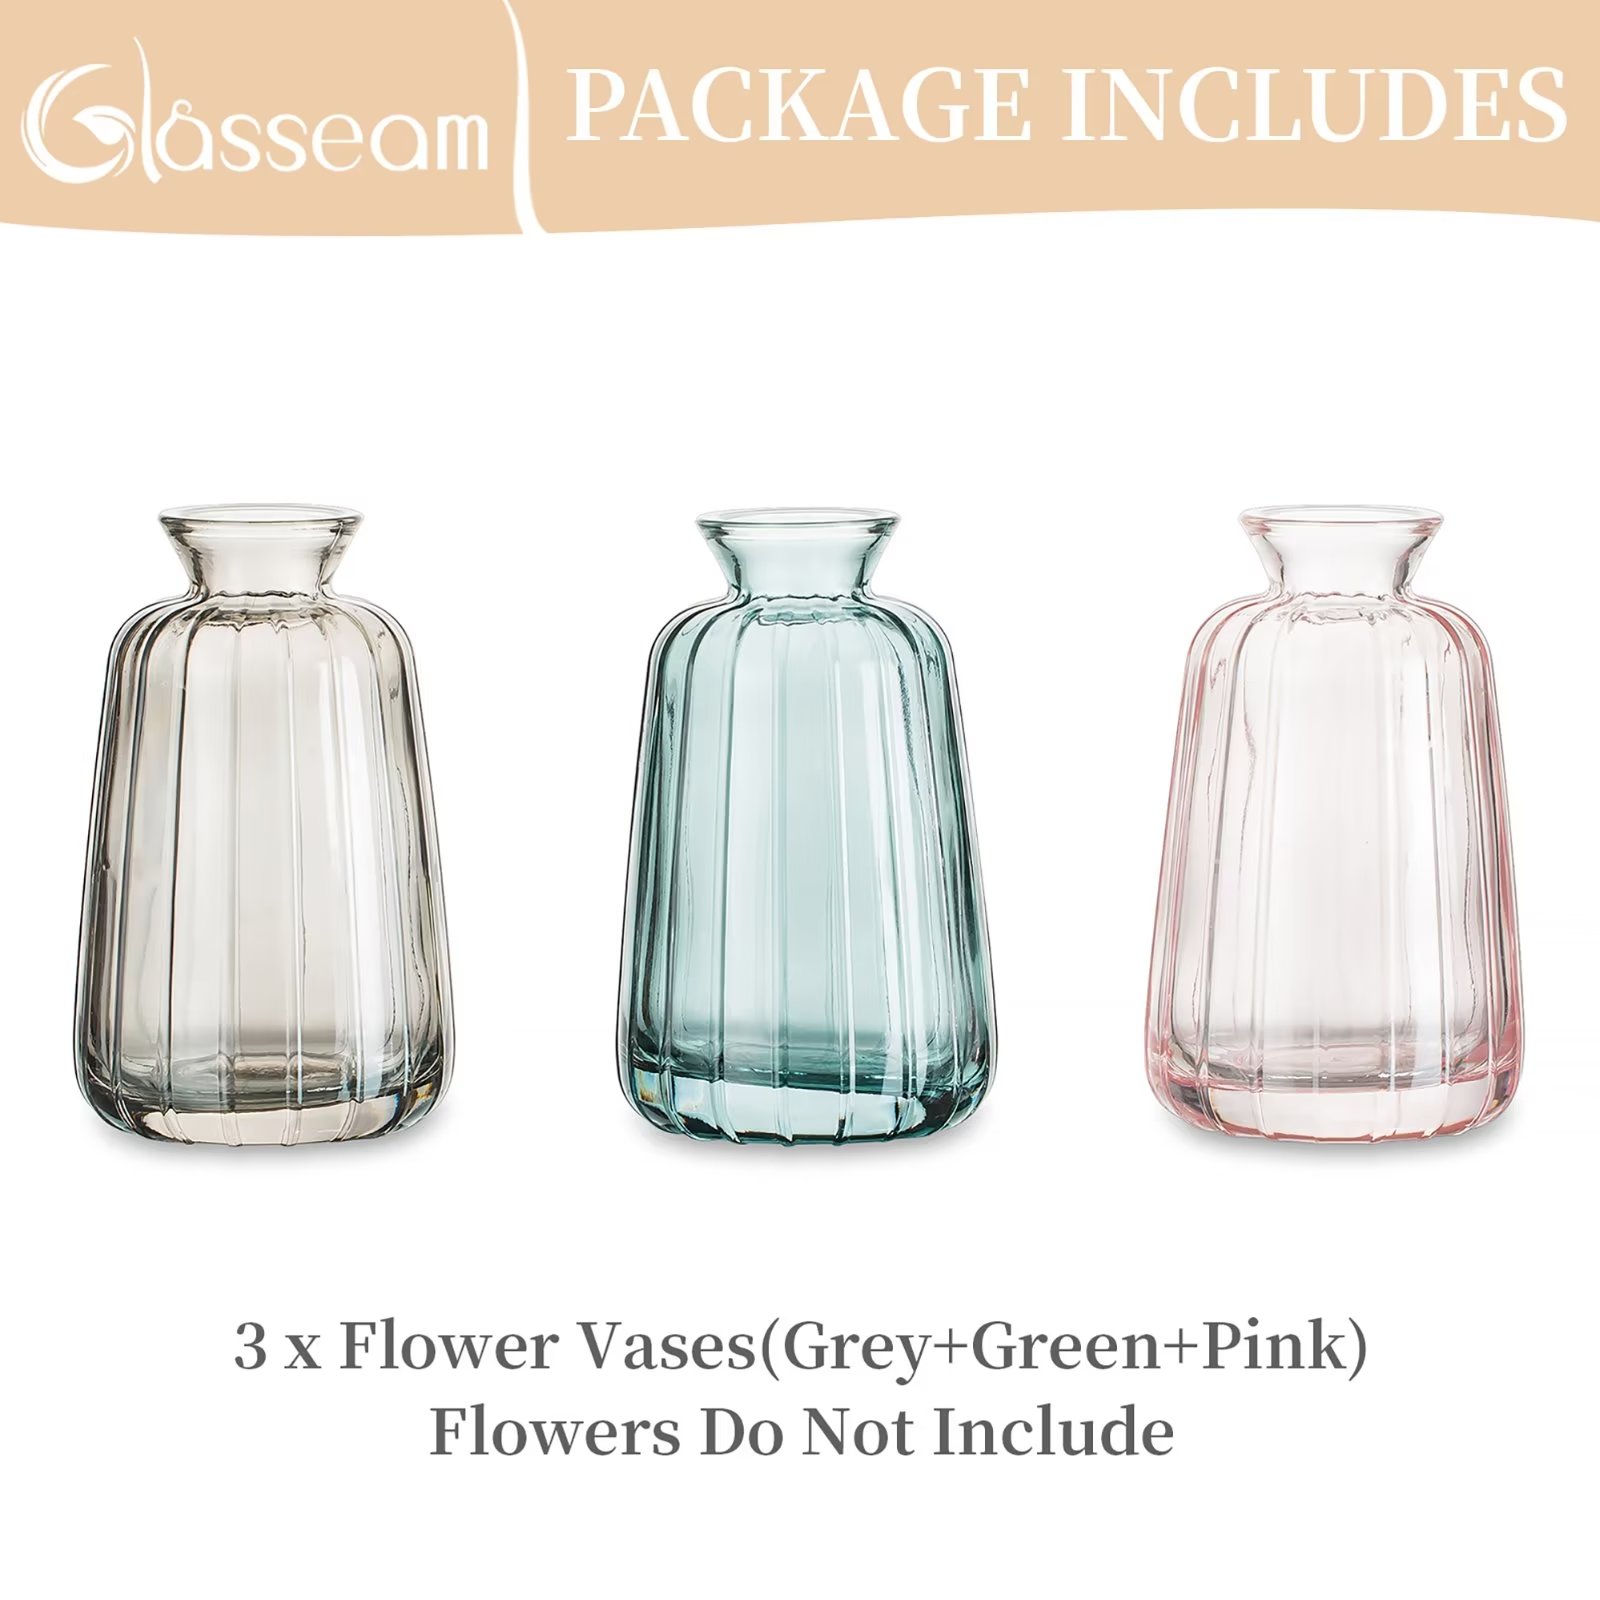 Mother's Gift Small Glass Bud Vase 4.52"Colorful Cute Ribbed Vases for Flowers Set of 3 (Pink+Grey+Green) - image 4 of 7